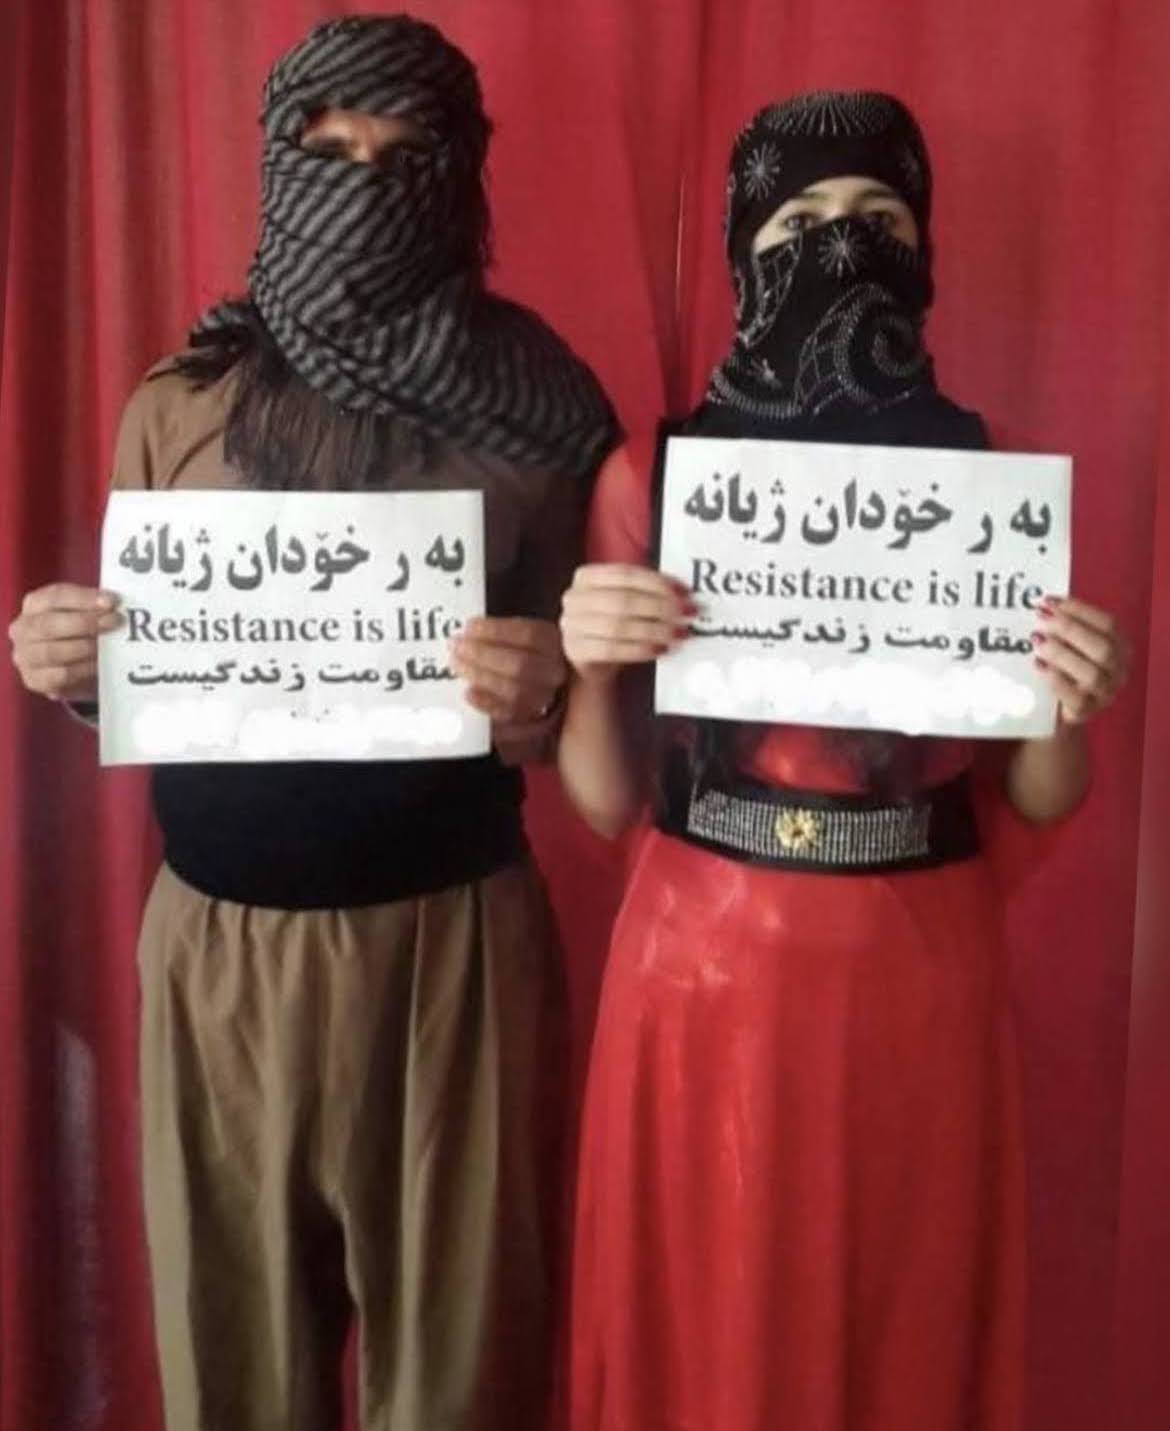 An archived image taken from an anonymous social media source. In the photo are two anonymous women, with faces covered by dark grey/black scarves, holding up printed signed that say “Resistance is life” in both English, Arabic, and Farsi. They stand in front of a deep red curtain.